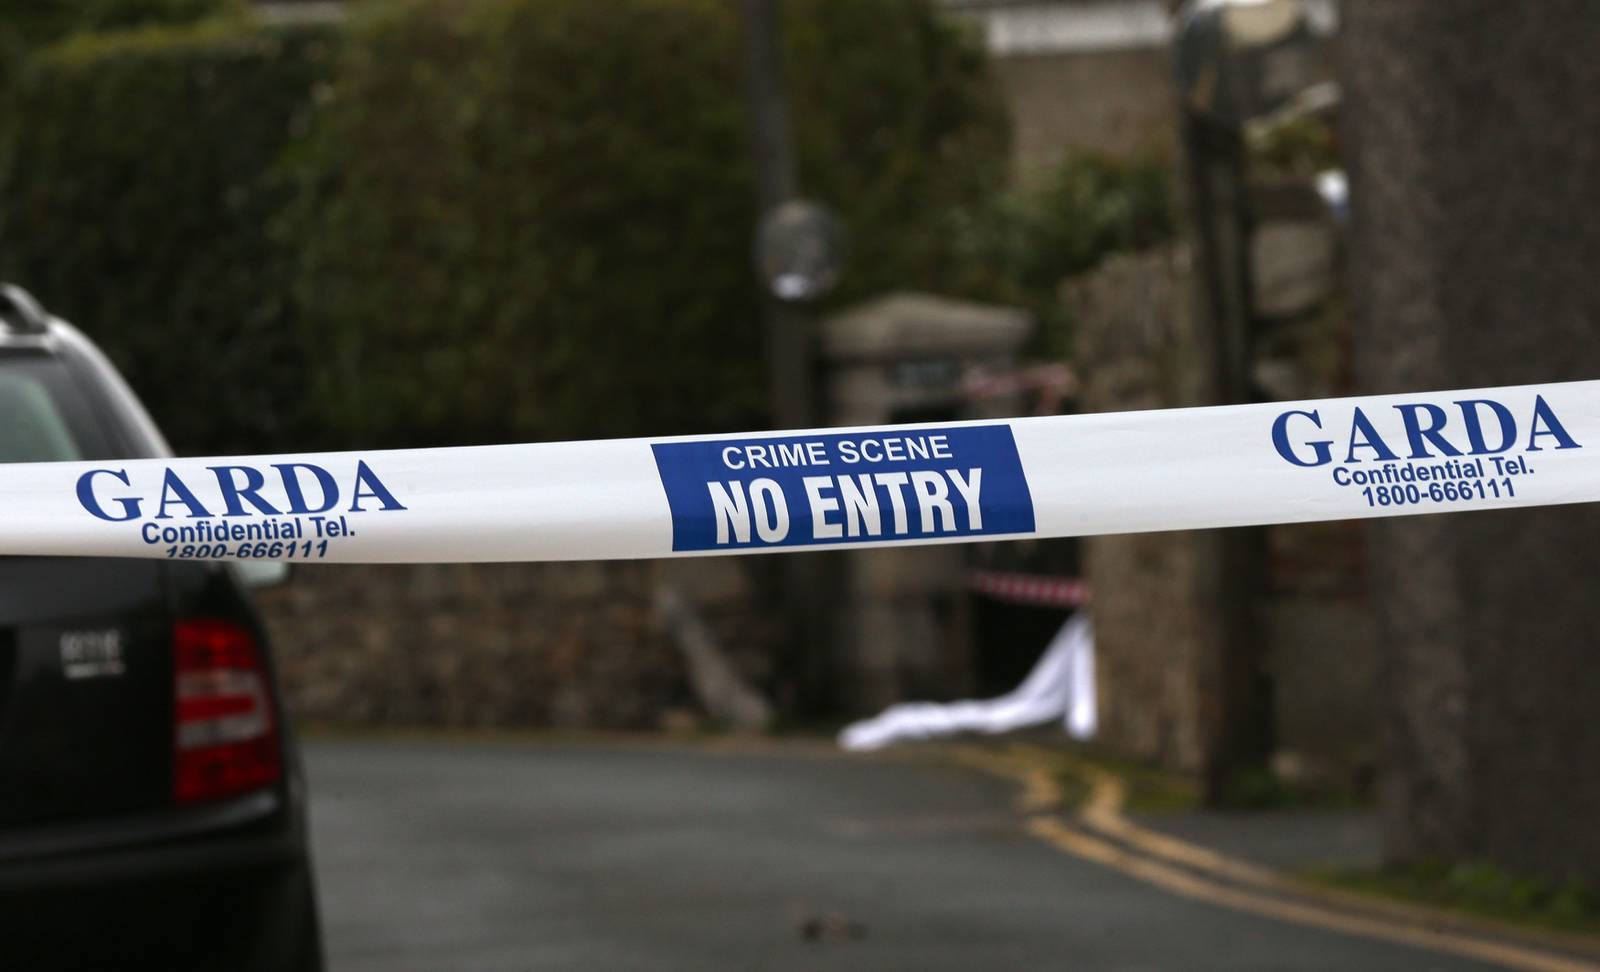 Gardai tape sealing off the scene where the body of a man was discovered on the ground near an apartment complex in Dalkey, Co Dublin. PRESS ASSOCIATION Photo. Picture date: Friday January 12th, 2018. Gardai said the scene had been sealed off to allow for a technical examination and the State Pathologist's office has been called in. See PA story POLICE Body Ireland. Photo credit should read: Laura Hutton/PA Wire